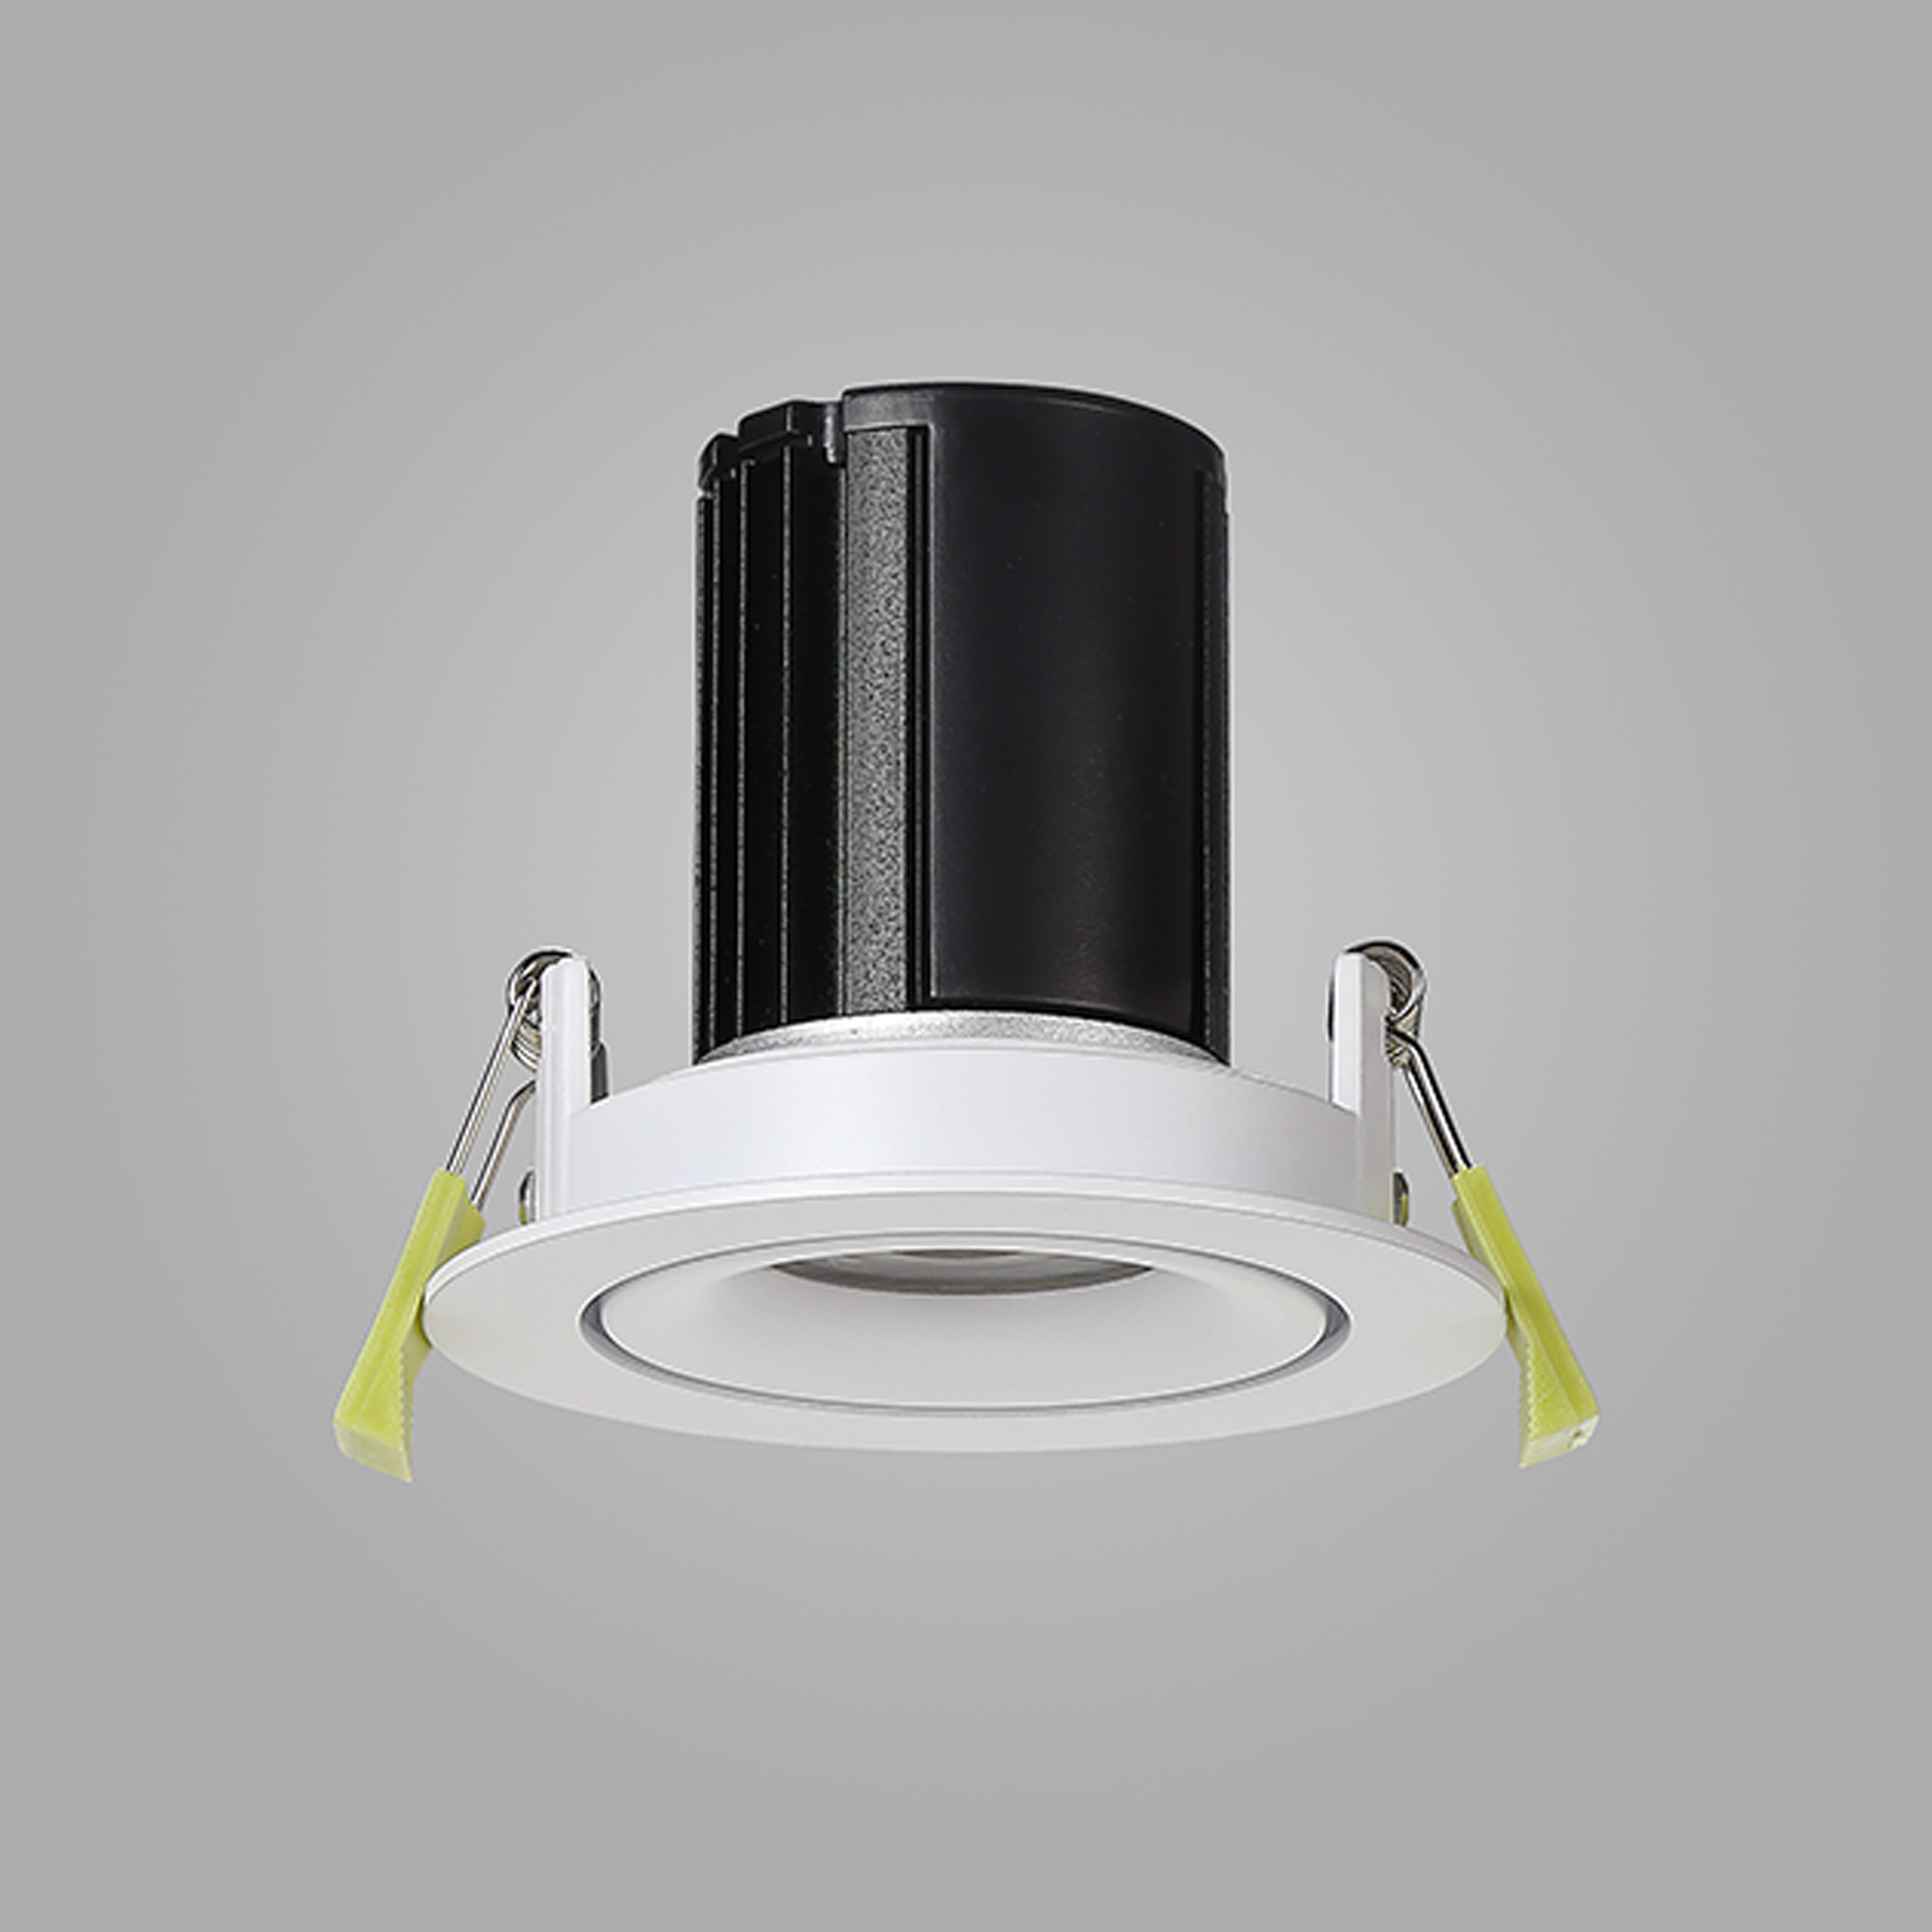 Bruve A 9 Recessed Ceiling Luminaires Dlux Round Recess Ceiling